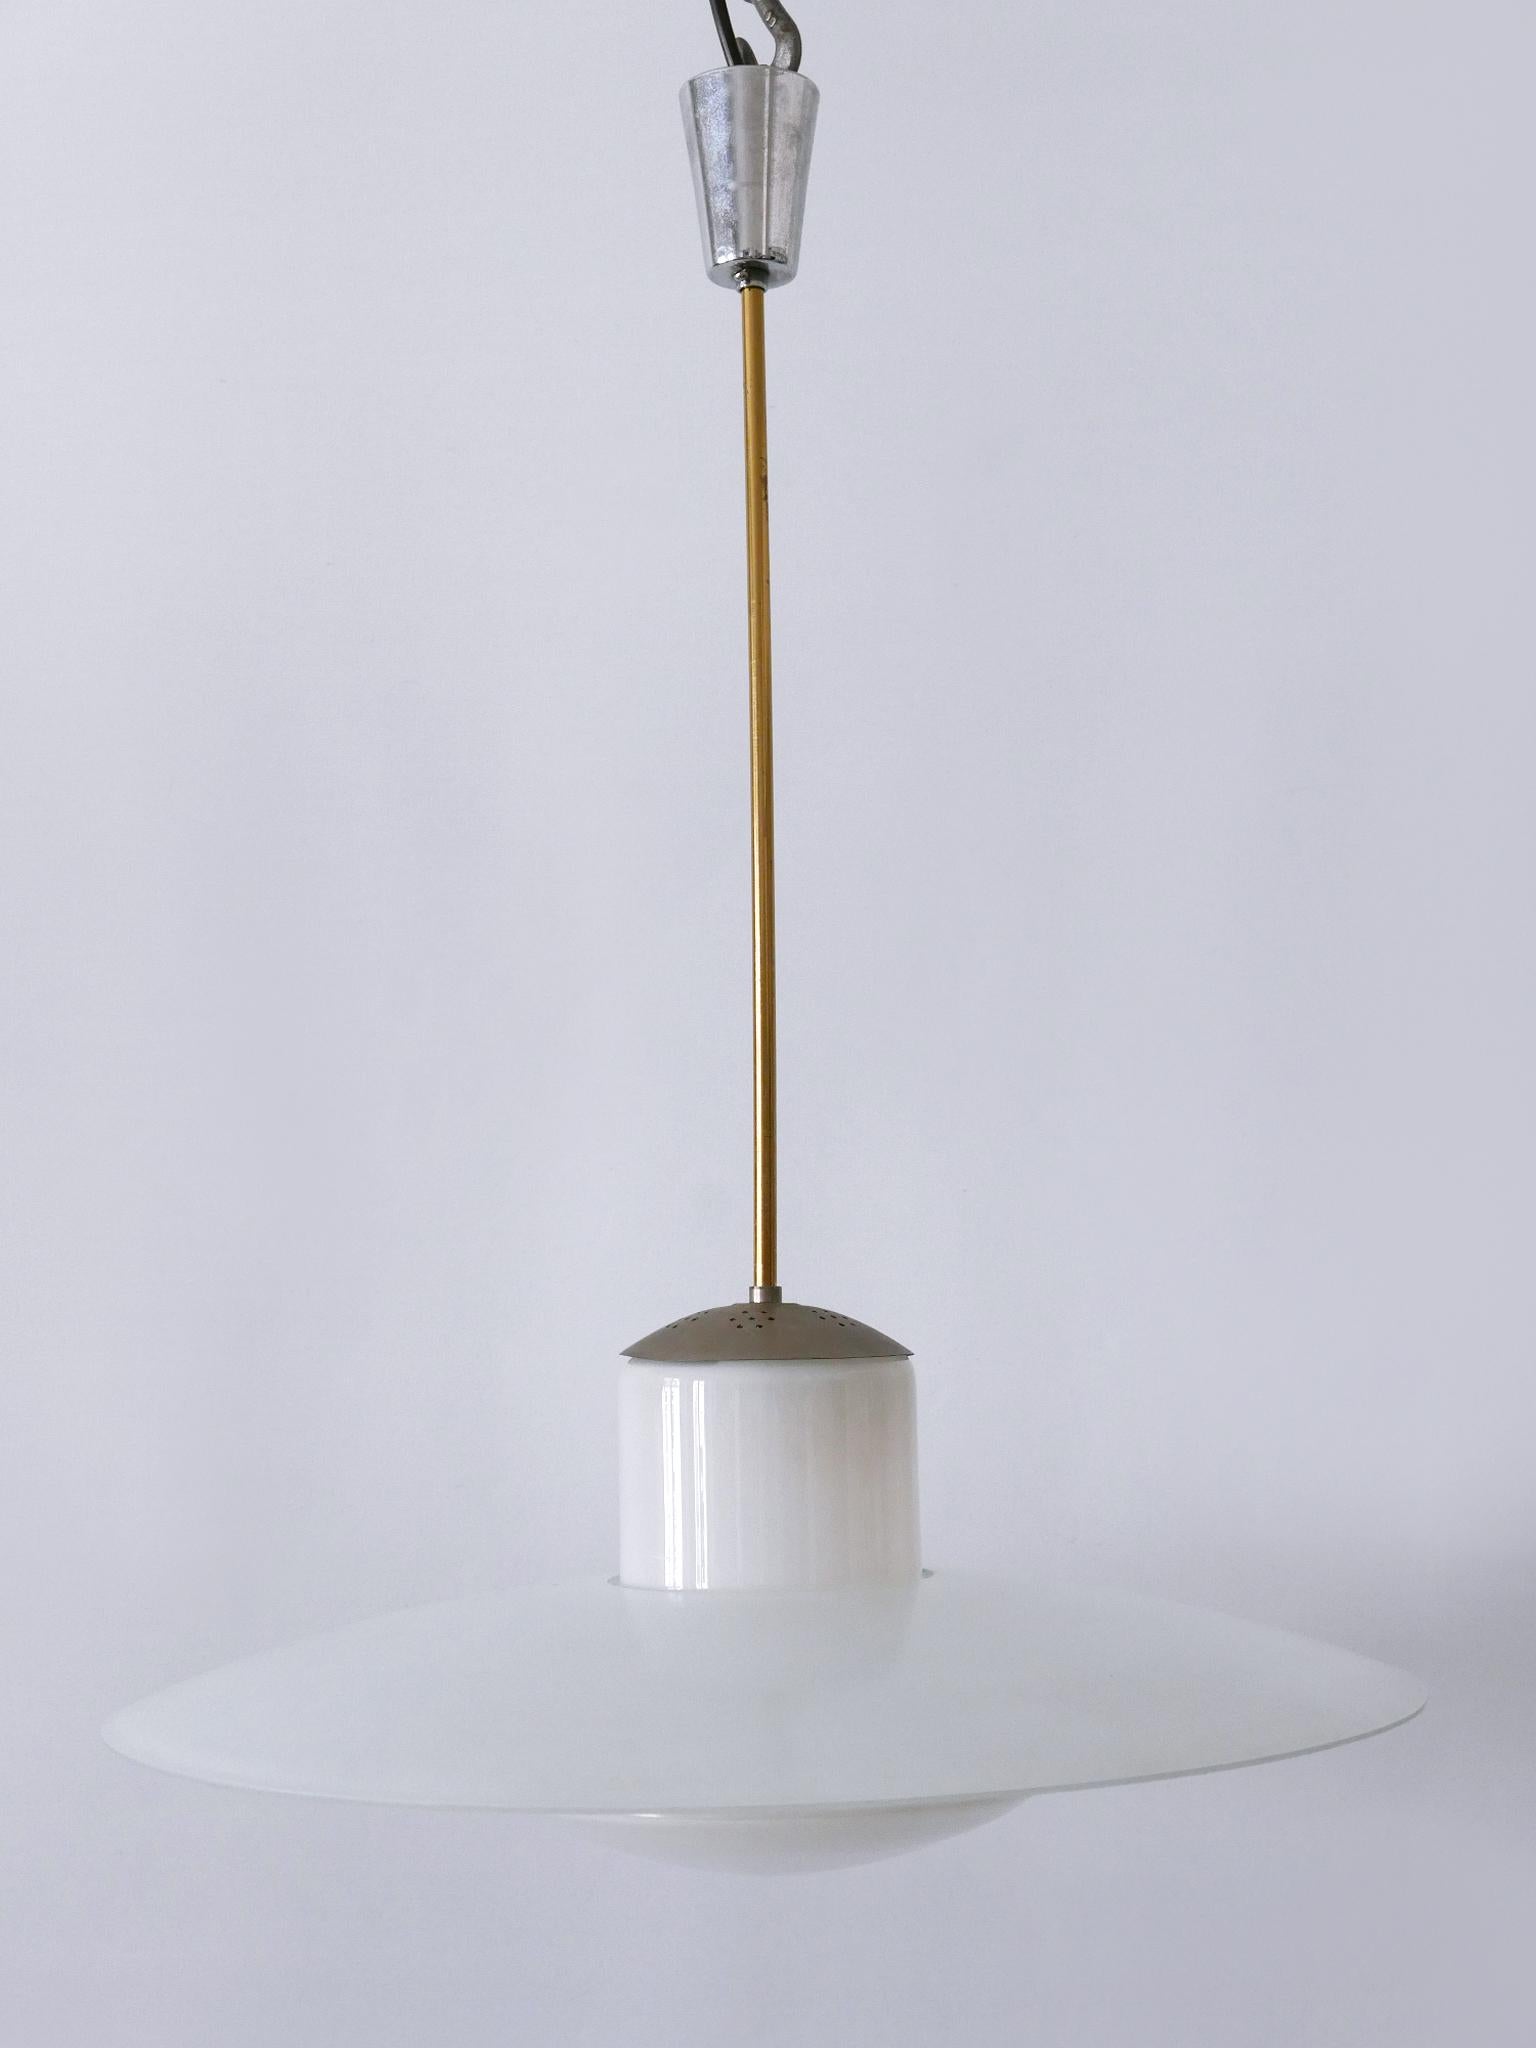 Rare Mid-Century Modern Pendant Lamp by Wolfgang Tümpel for Doria Germany 1950s For Sale 10